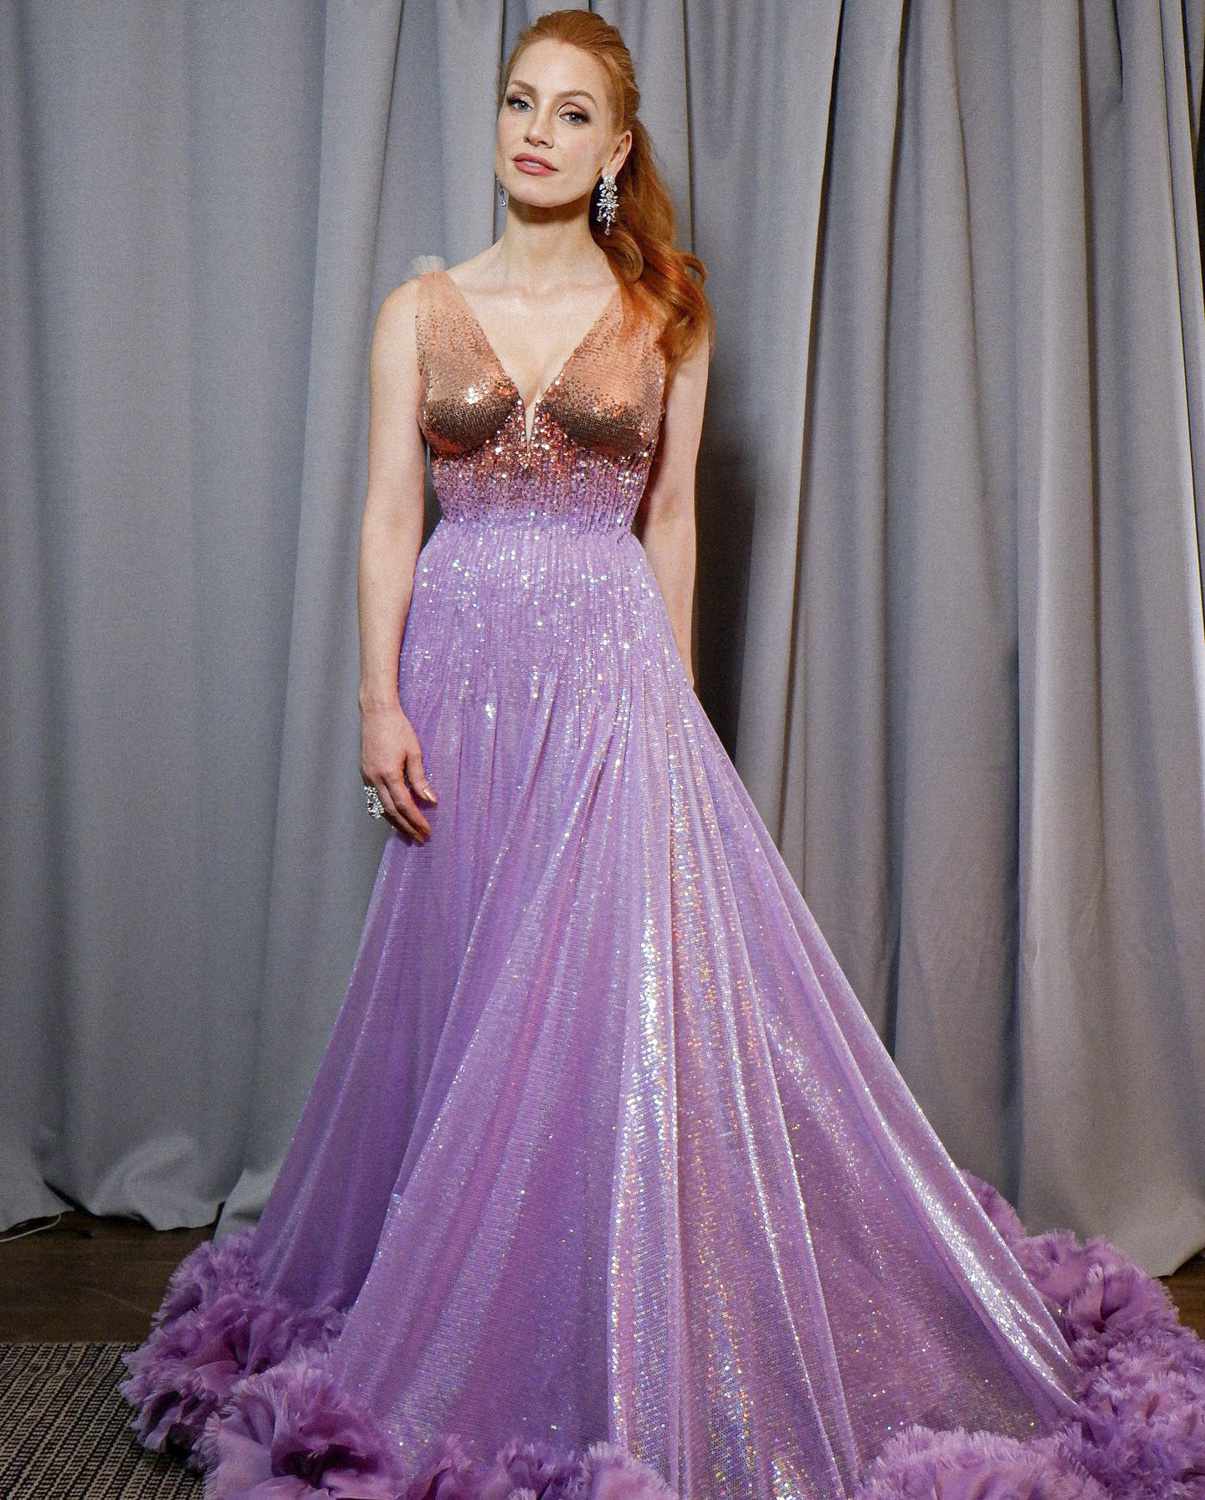 Jessica Chastain Wears Ombre Gucci Gown at the 2022 Oscars  PEOPLEcom